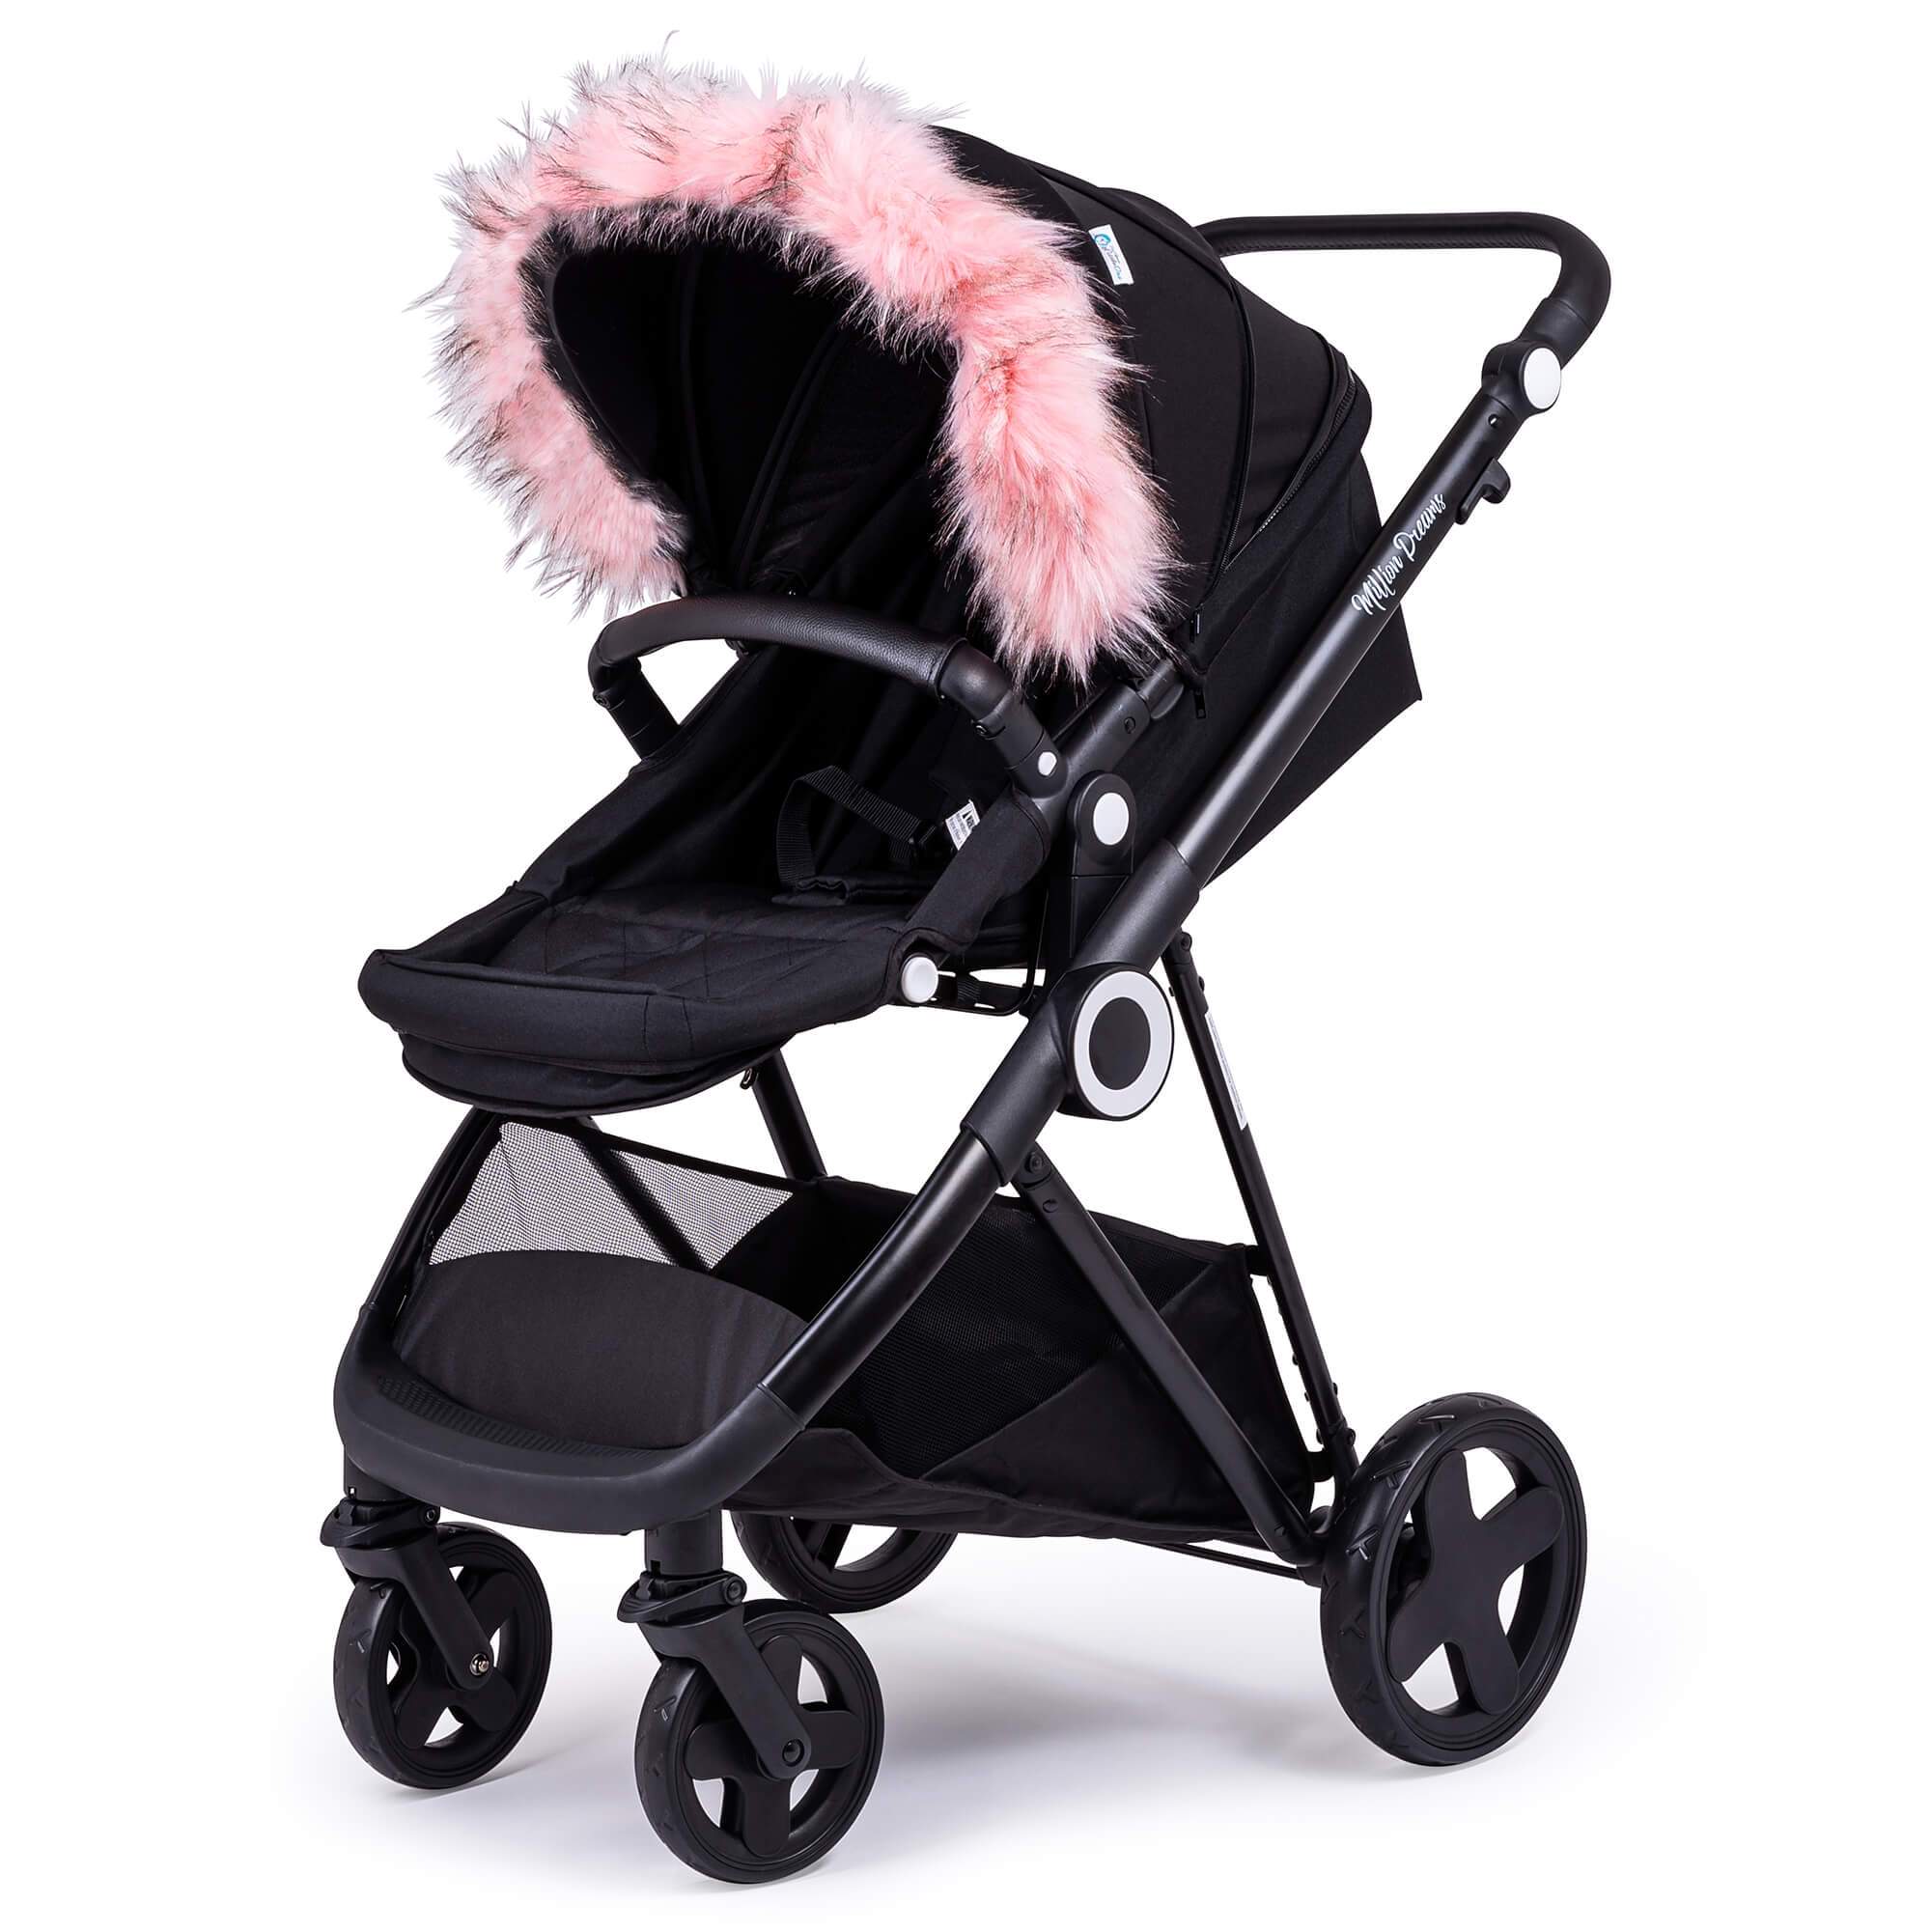 Pram Fur Hood Trim Attachment for Pushchair Compatible with Inglesina - Light Pink / Fits All Models | For Your Little One